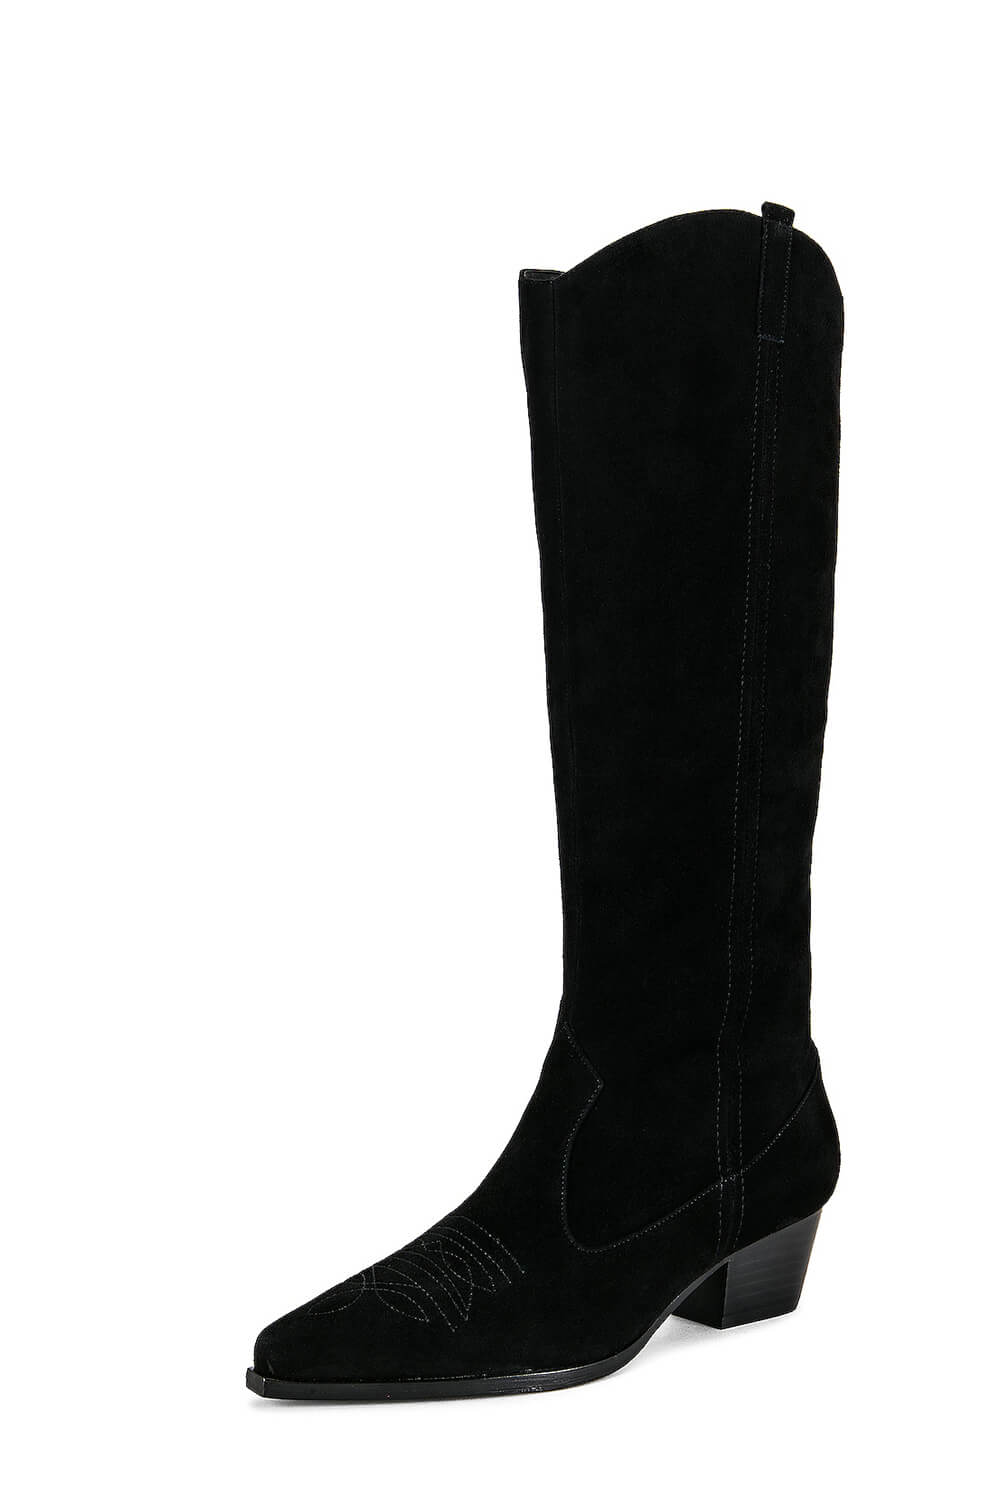 Suede Pointed Toe Western Cowboy Knee High Boots - Black